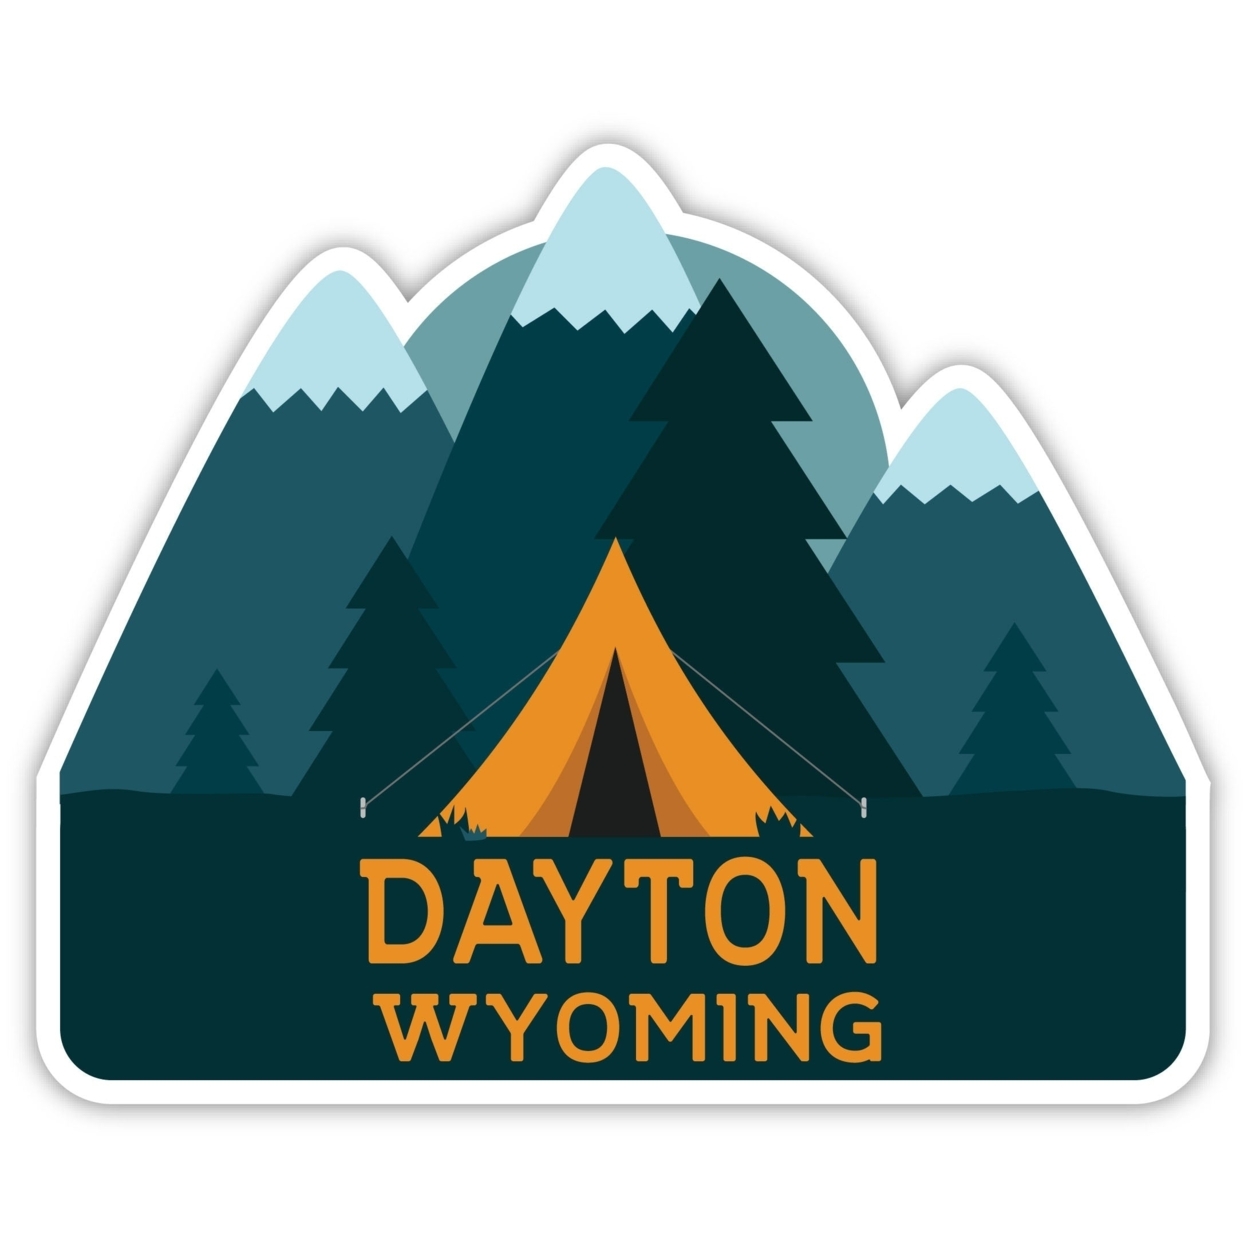 Dayton Wyoming Souvenir Decorative Stickers (Choose Theme And Size) - 4-Pack, 2-Inch, Tent